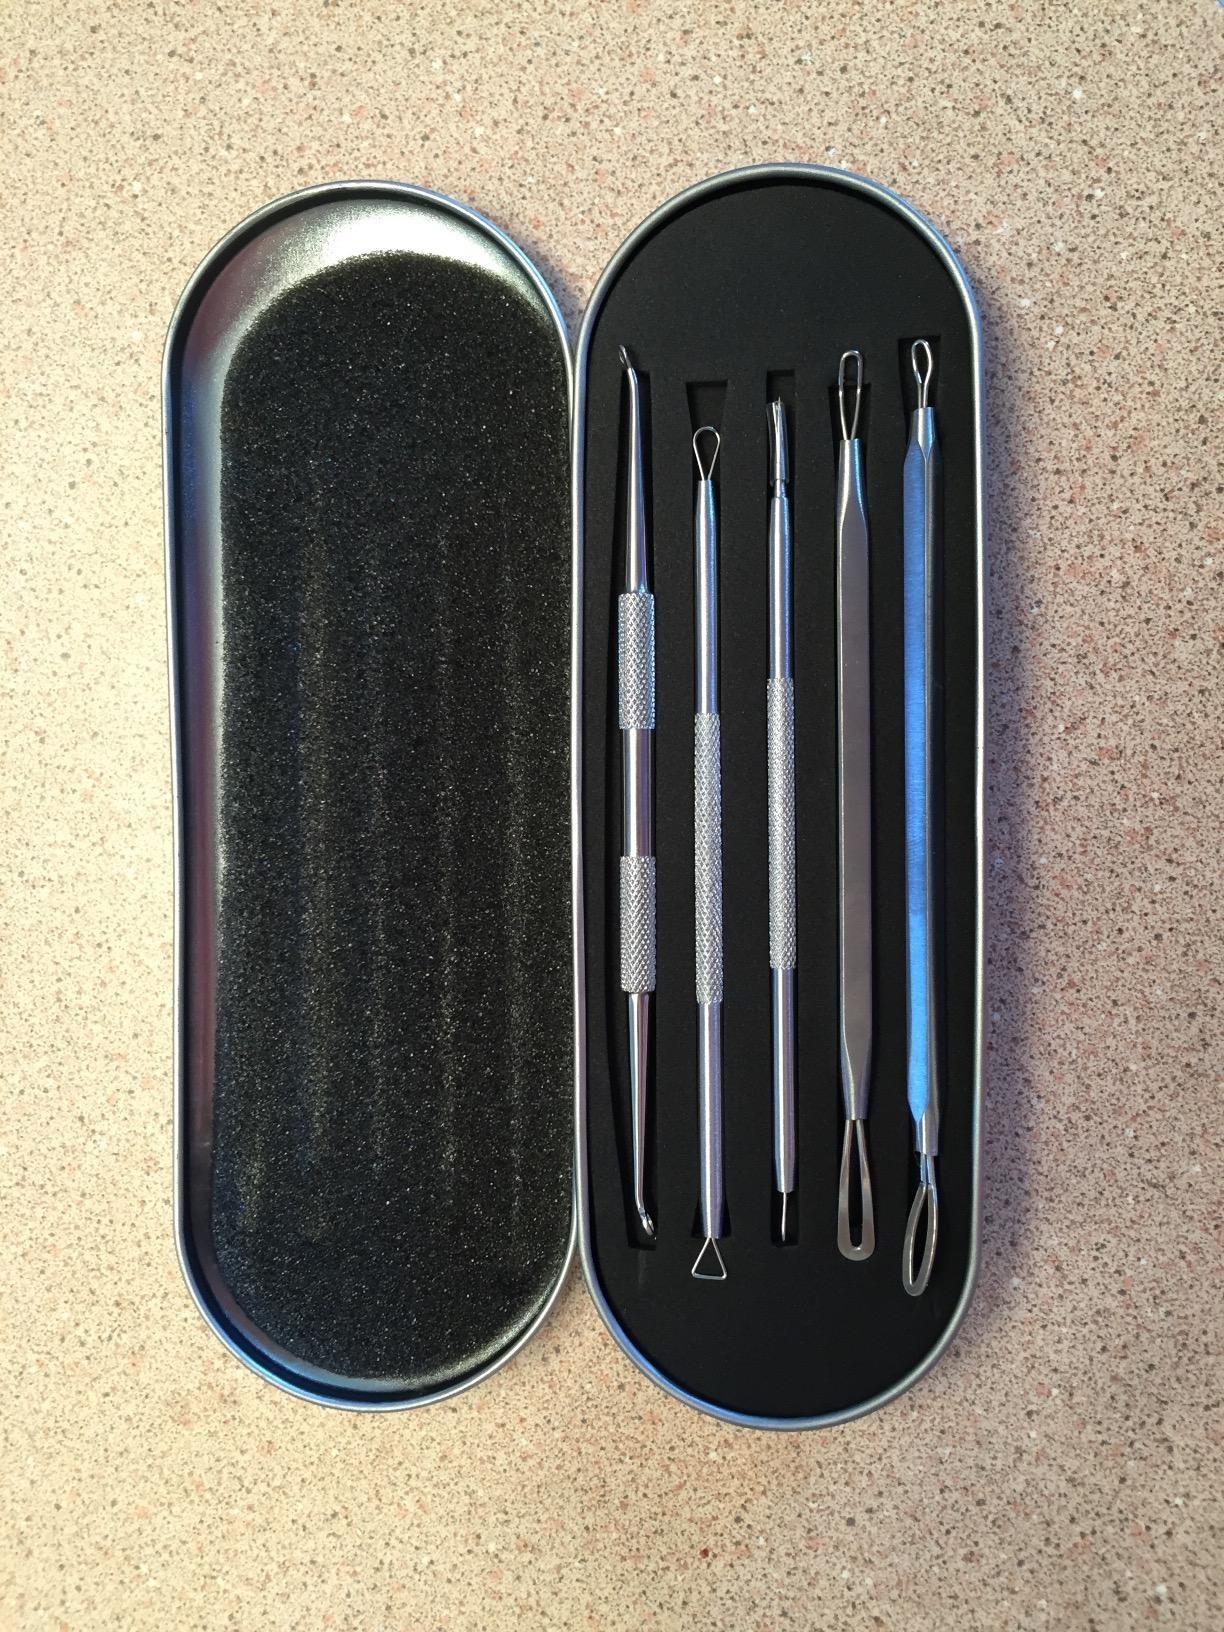 A silver tin (shaped like an eyeglass case) is black on the inside and has five skinny slots where the blackhead remover tools are sitting. A hand is holding one of the tools which has a looped end.